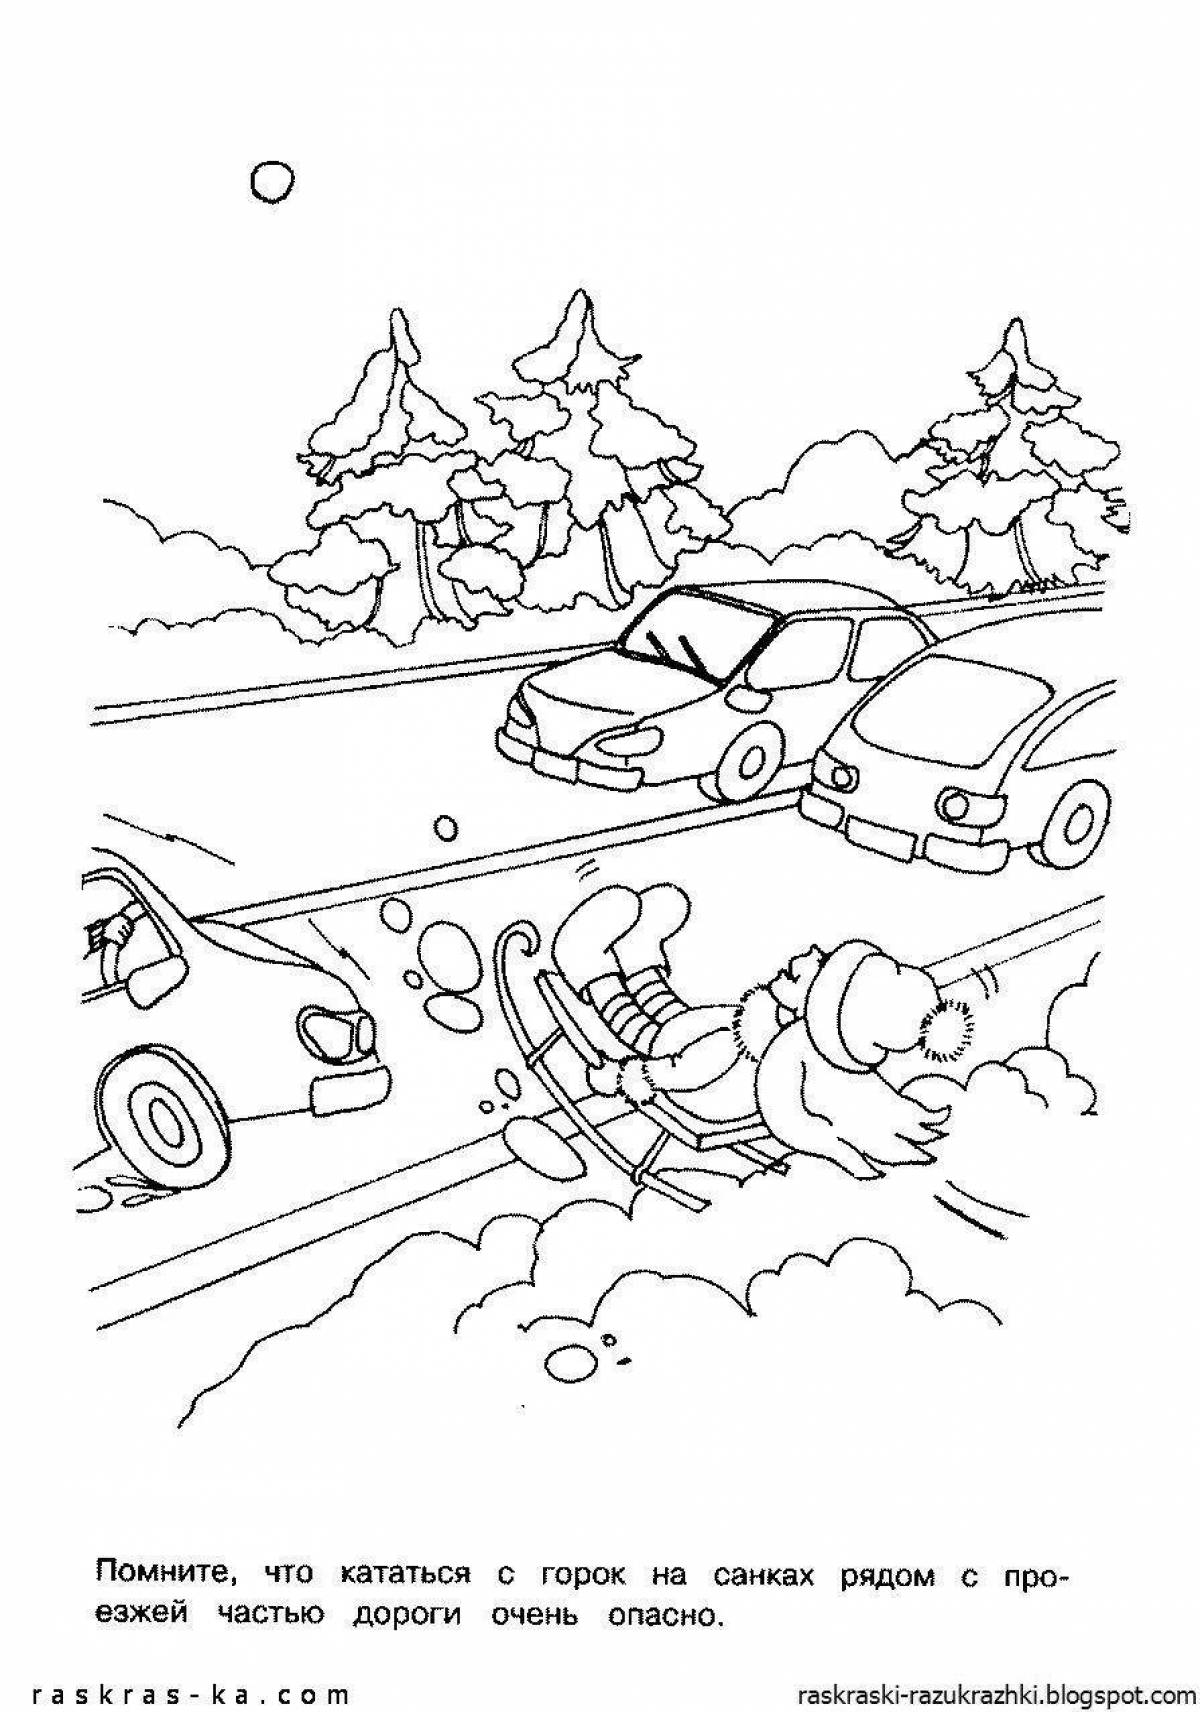 Interesting safety coloring page for 6-7 year olds